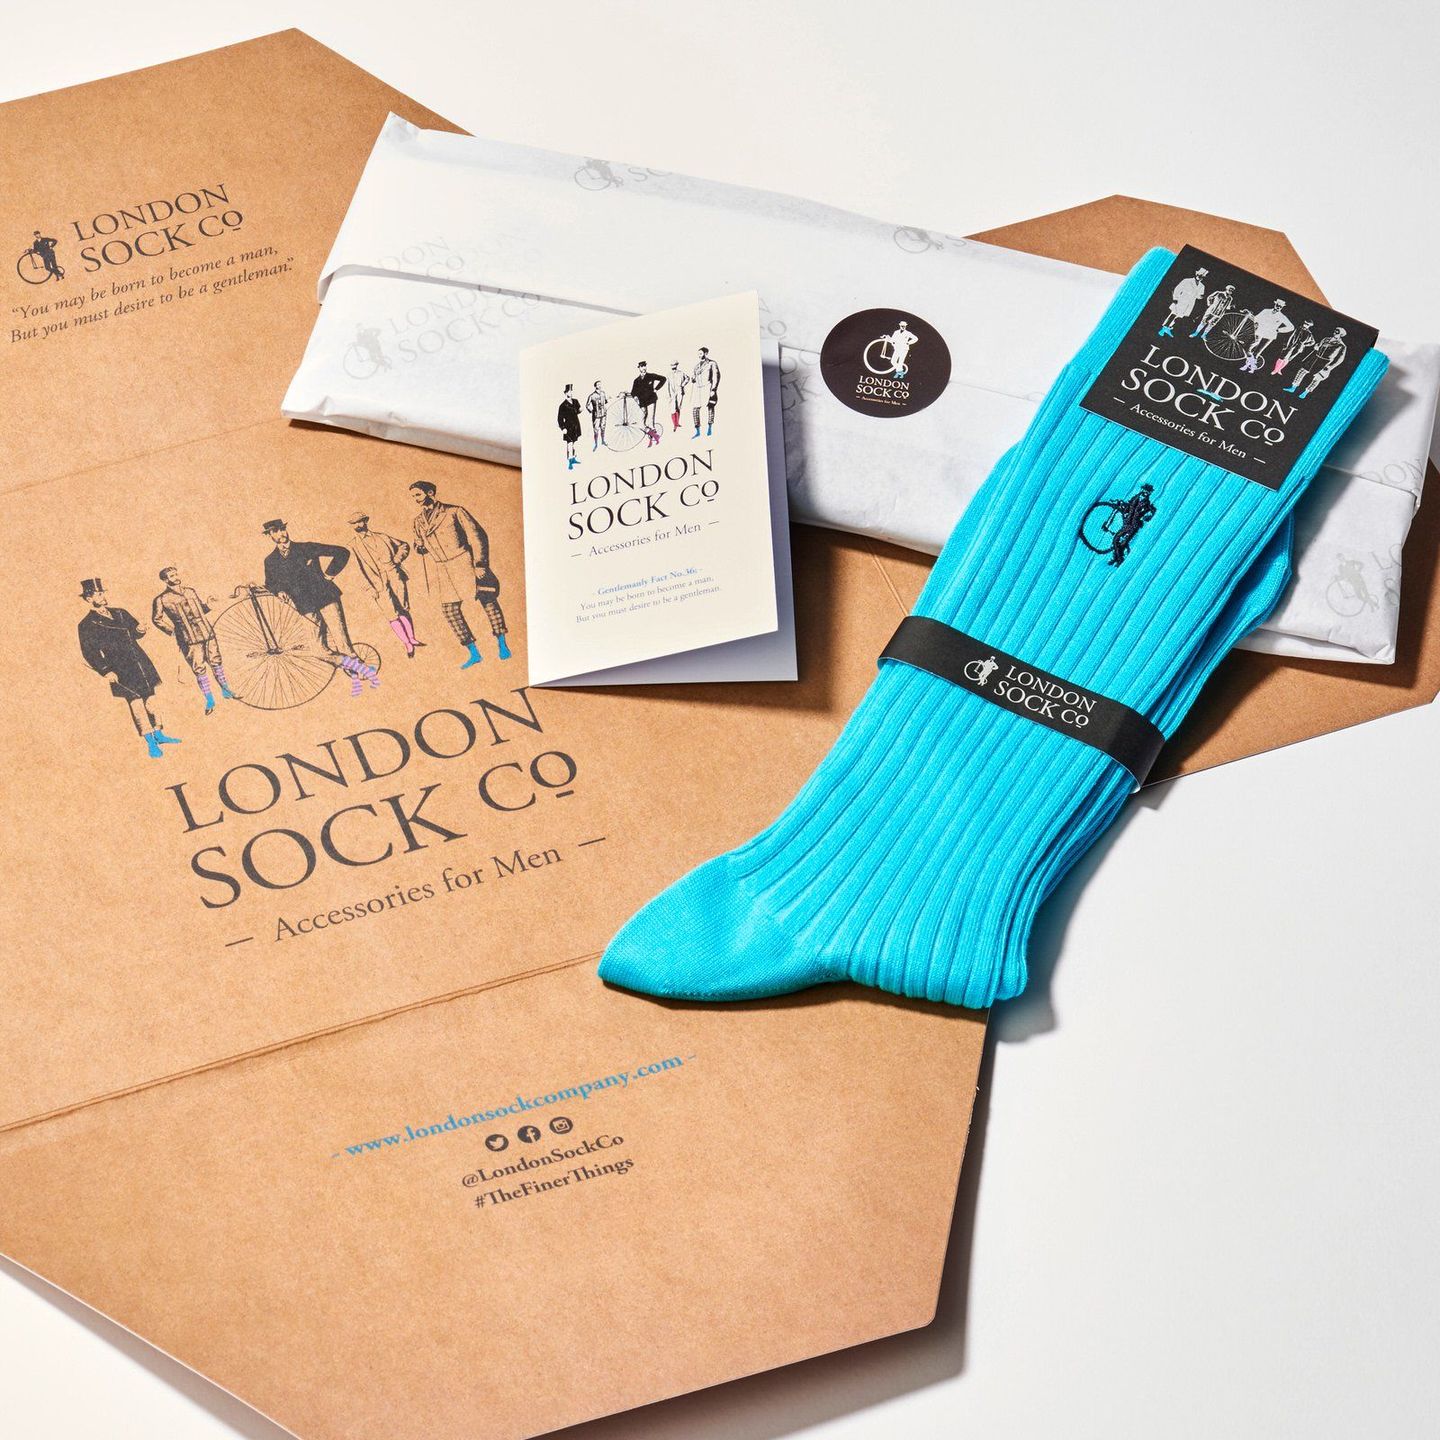 Starter pack with turquoise socks, wrapped socks and a card on top of brown branded packaging